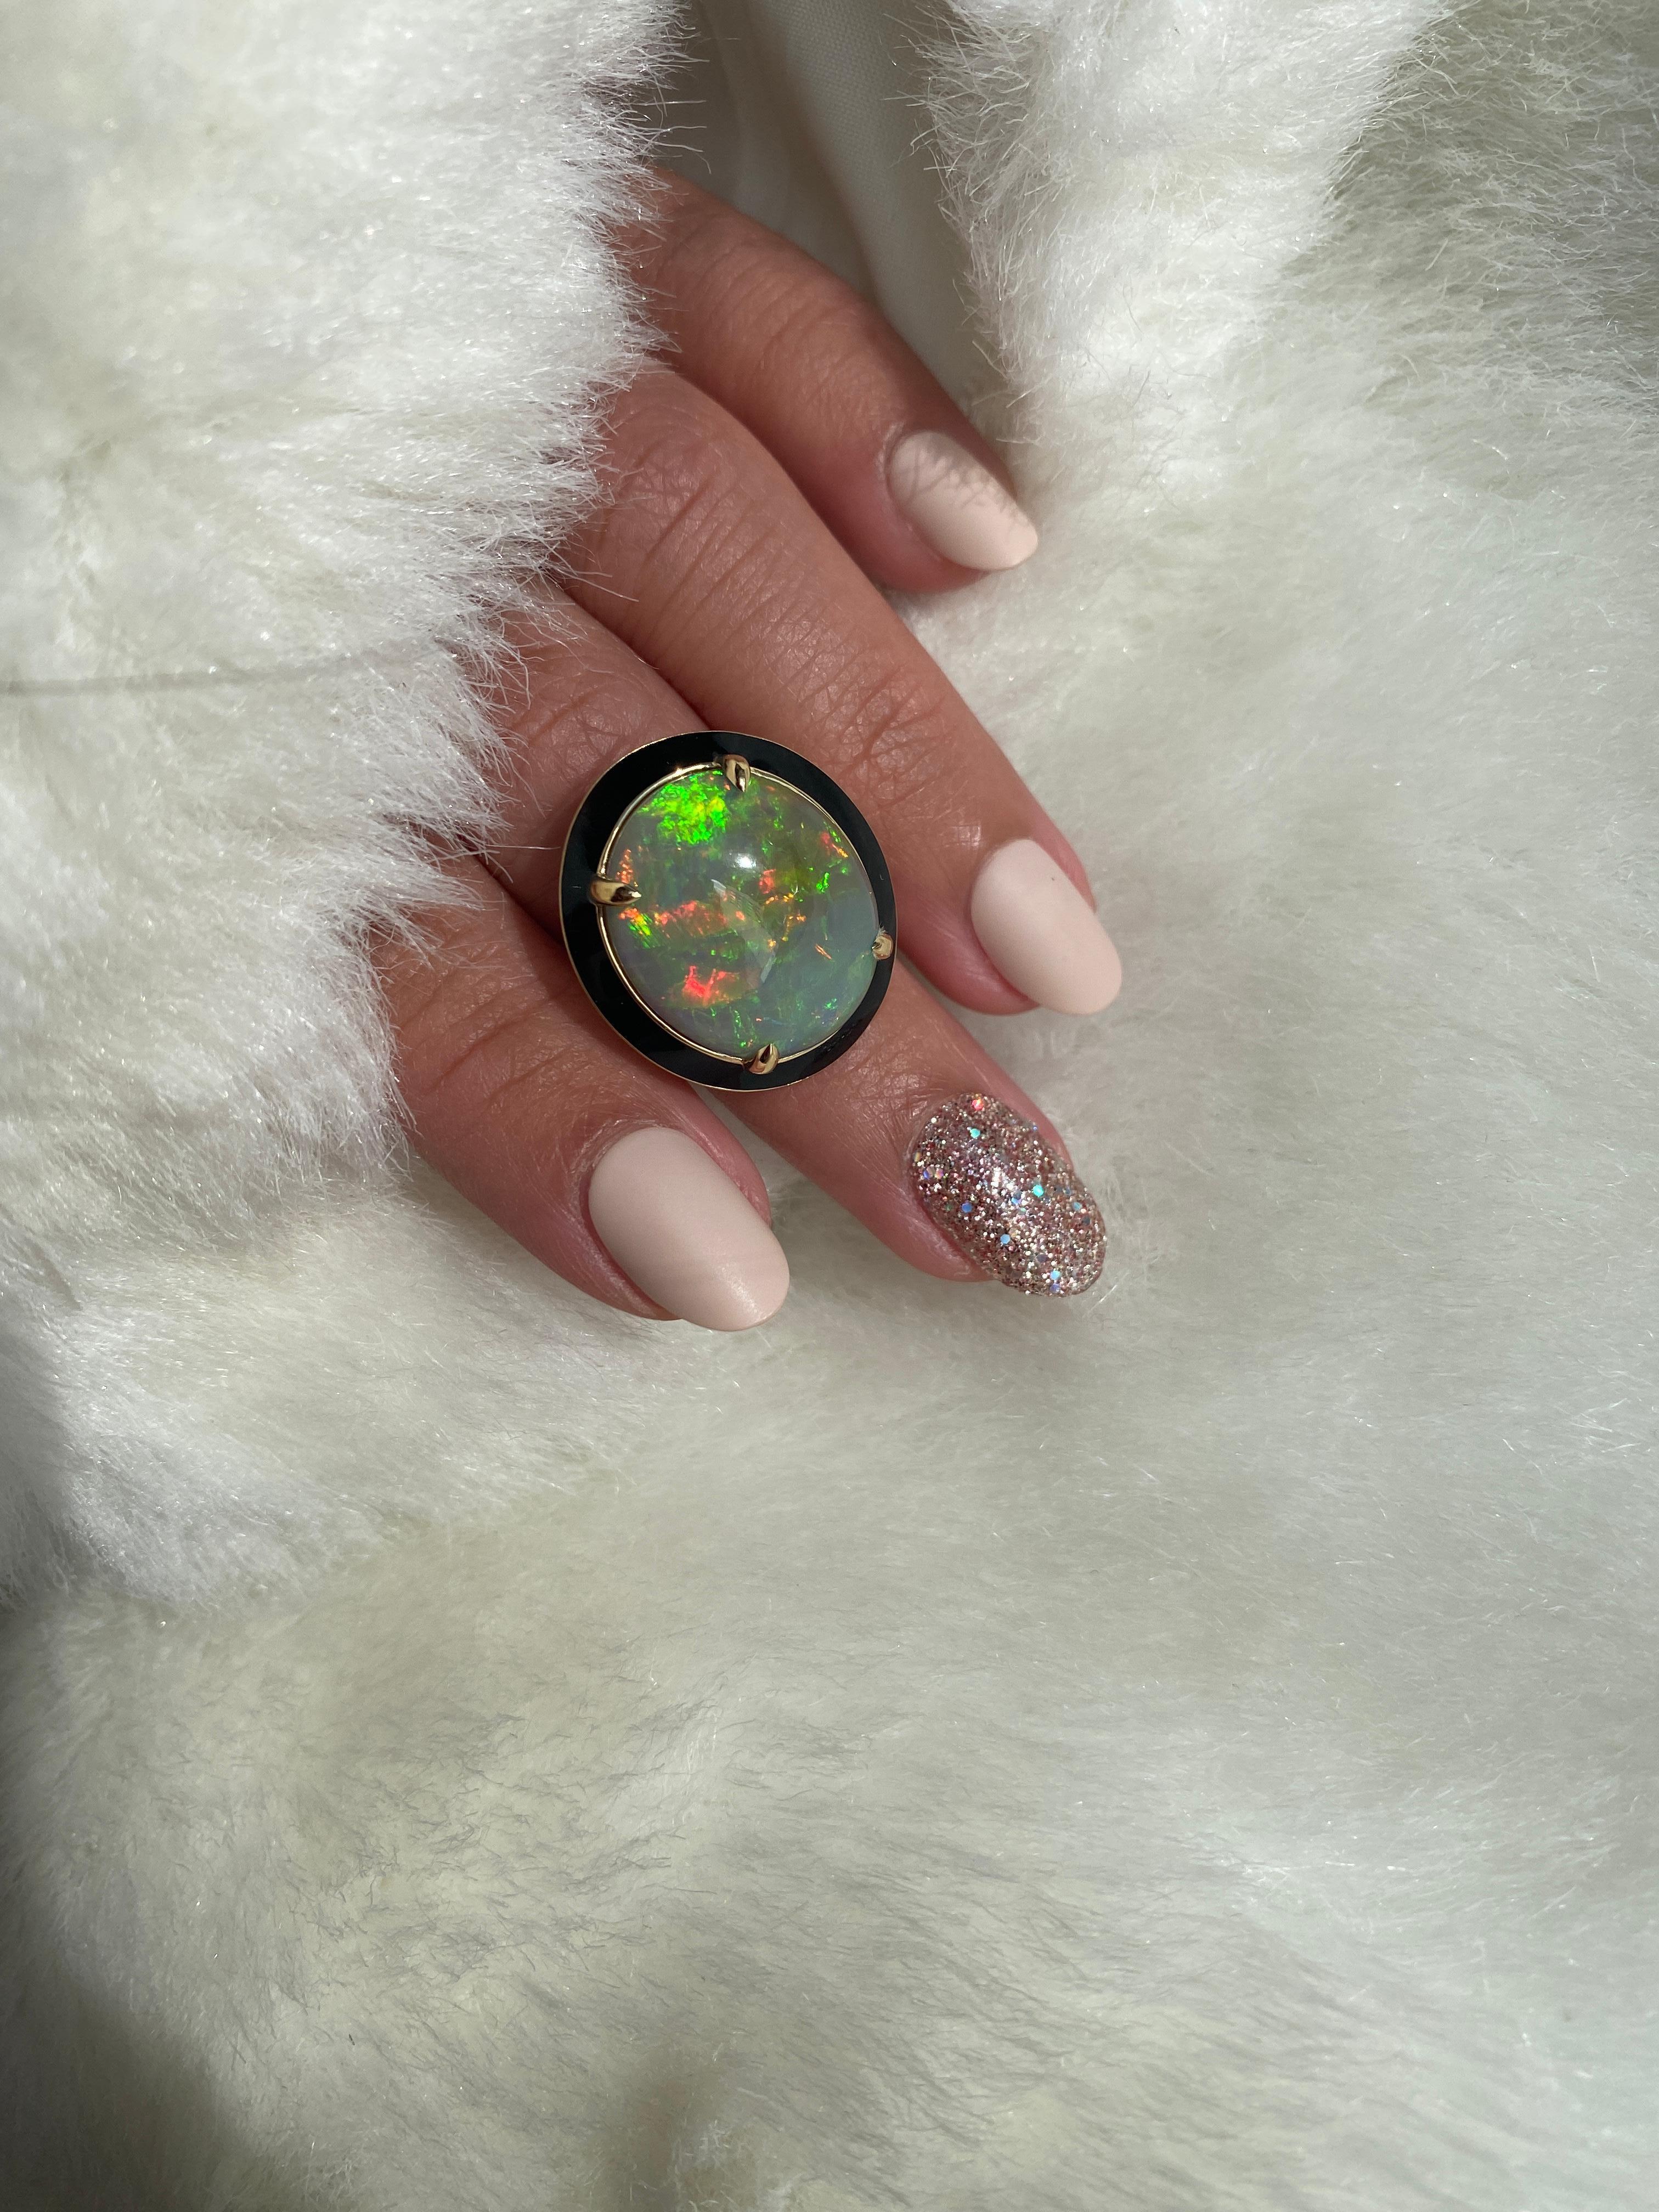 Impeccable and unique combination of Opal Cabochon with Black Enamel. Set in 18K Yellow Gold, from our ‘G-One Collection. If you want to make a statement, this is the perfect ring to do it!

* Stone size: 19 x 17 mm
* Gemstone: 100% Earth Mined 
*